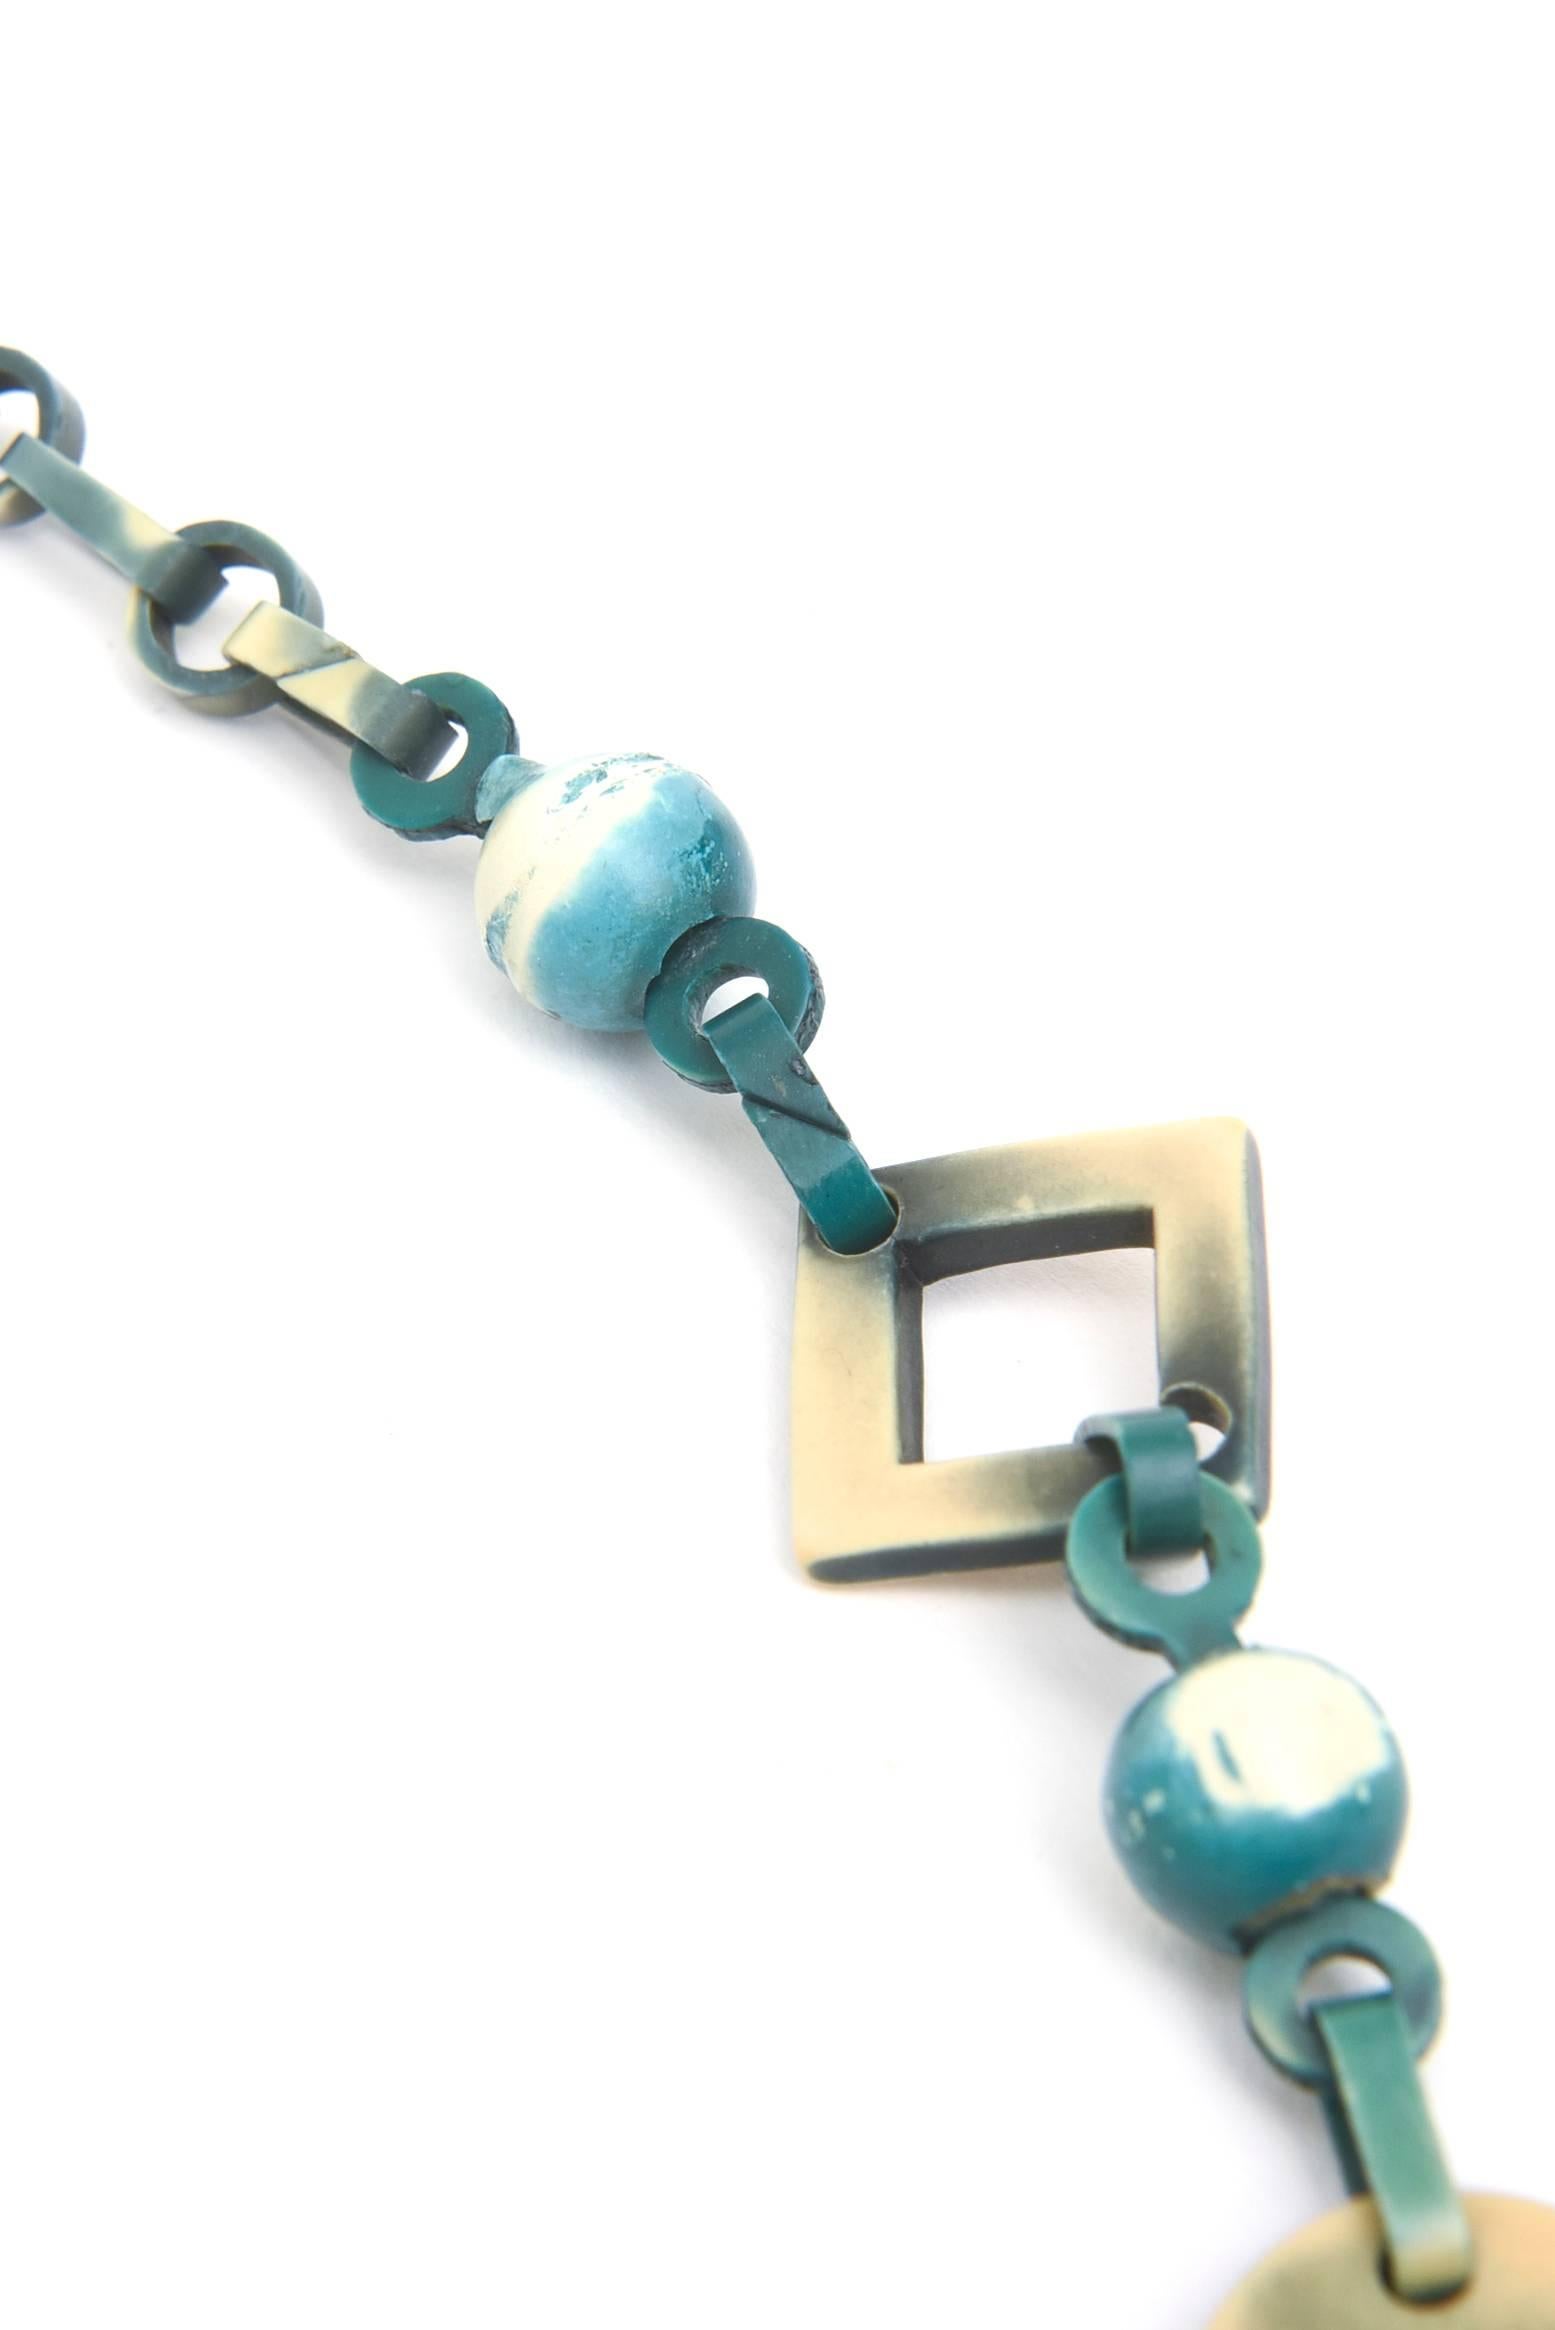 Egyptian Revival Vintage Teal Turquoise Green and Tan Celluloid Necklace  In Good Condition For Sale In North Miami, FL